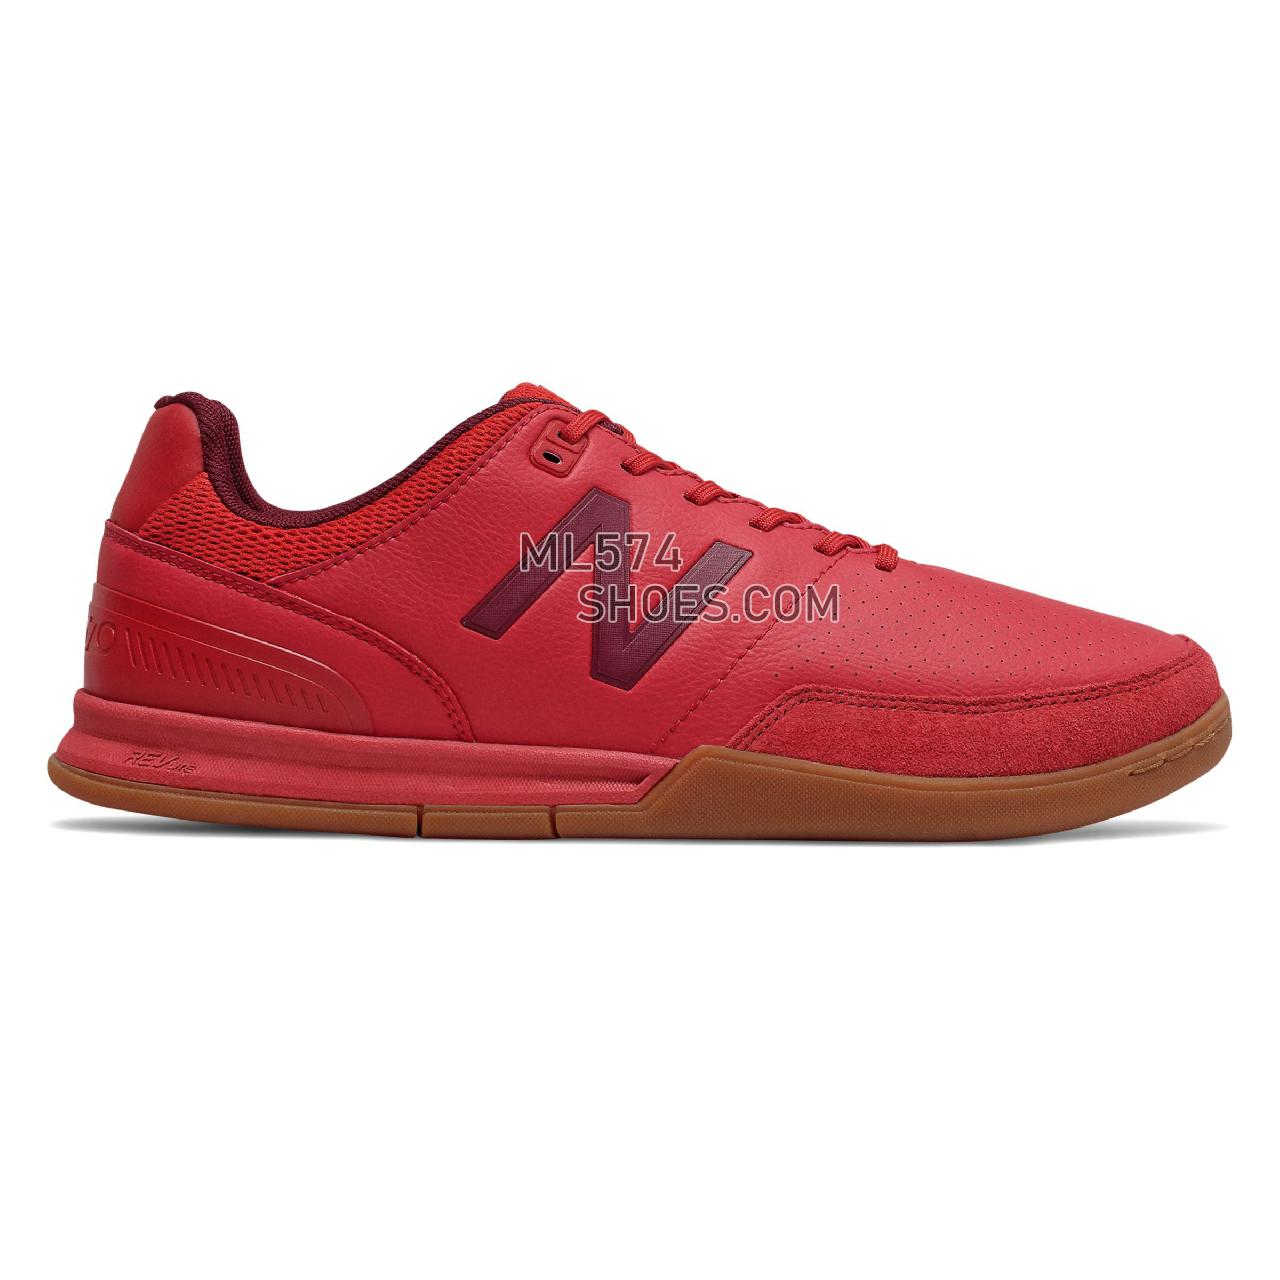 New Balance Audazo v4 Command IN - Men's Audazo v4 Command IN Football - Team Red with Garnet - MSAMITG4